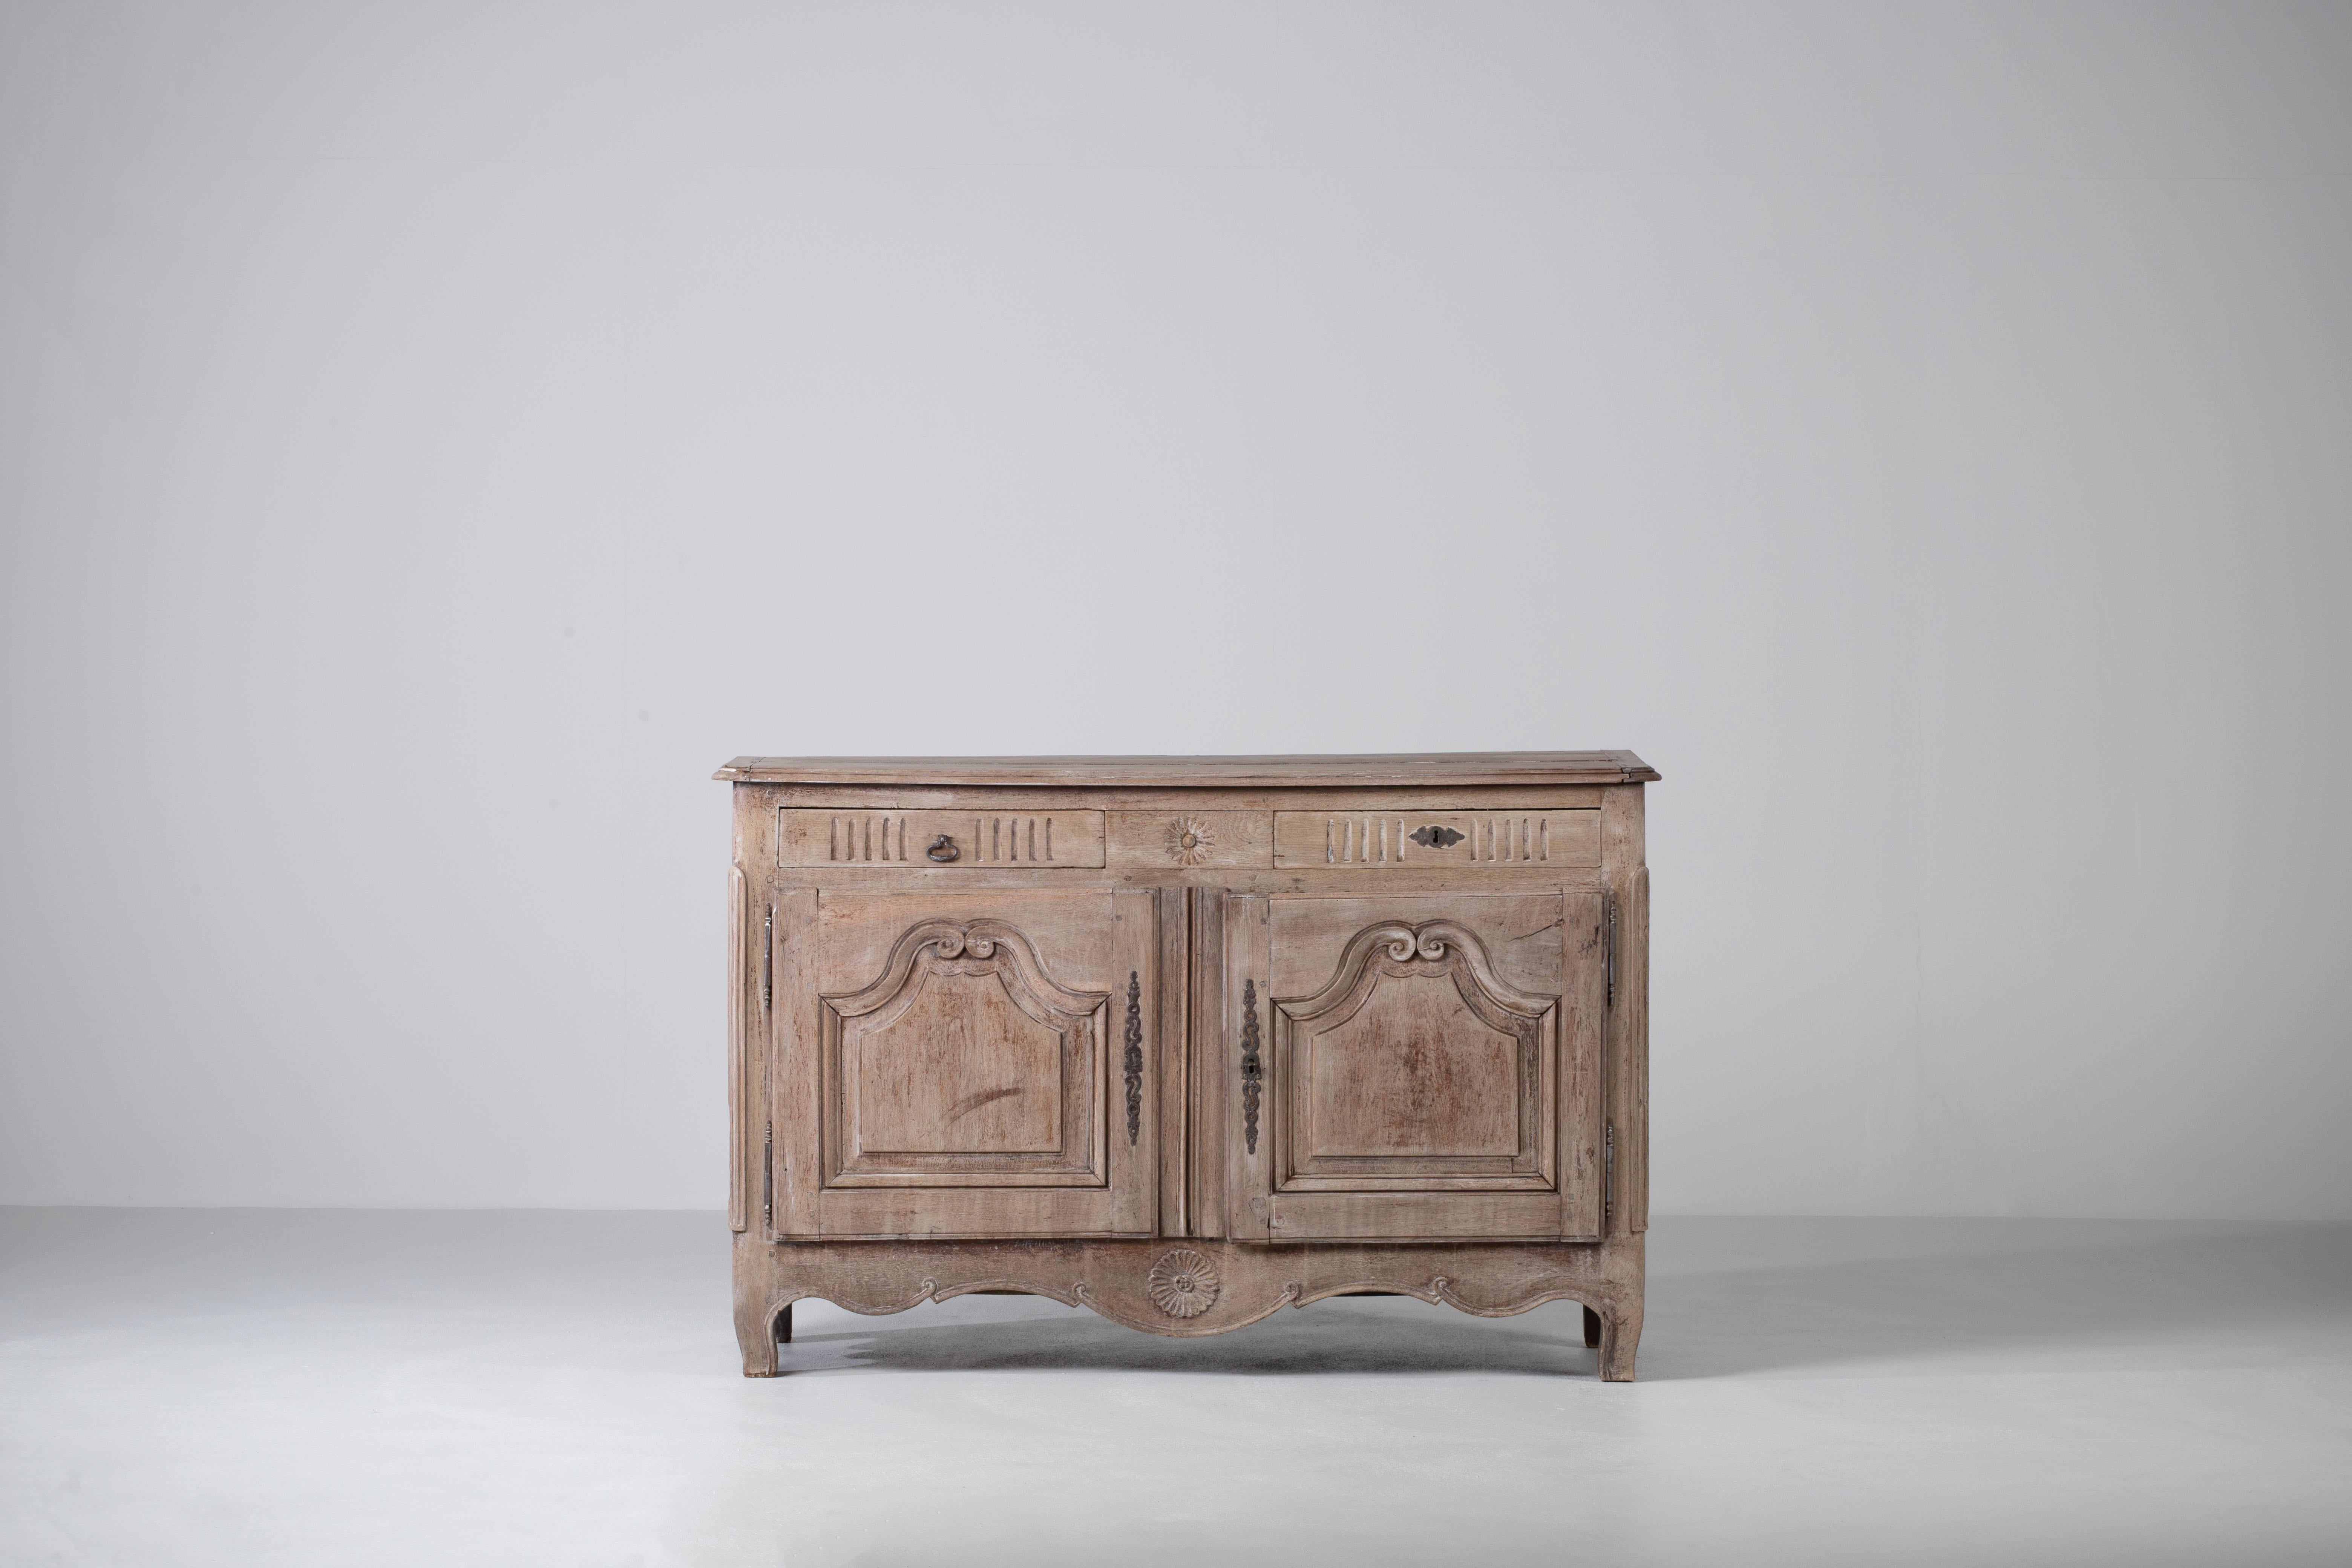 A two door and drawer provencal cabinet from France, circa 1890. Representing the casual yet refined aesthetic of the French countryside, finished in a contemporary bright finish, enhancing the natural textured figure of the wood and subtle carved